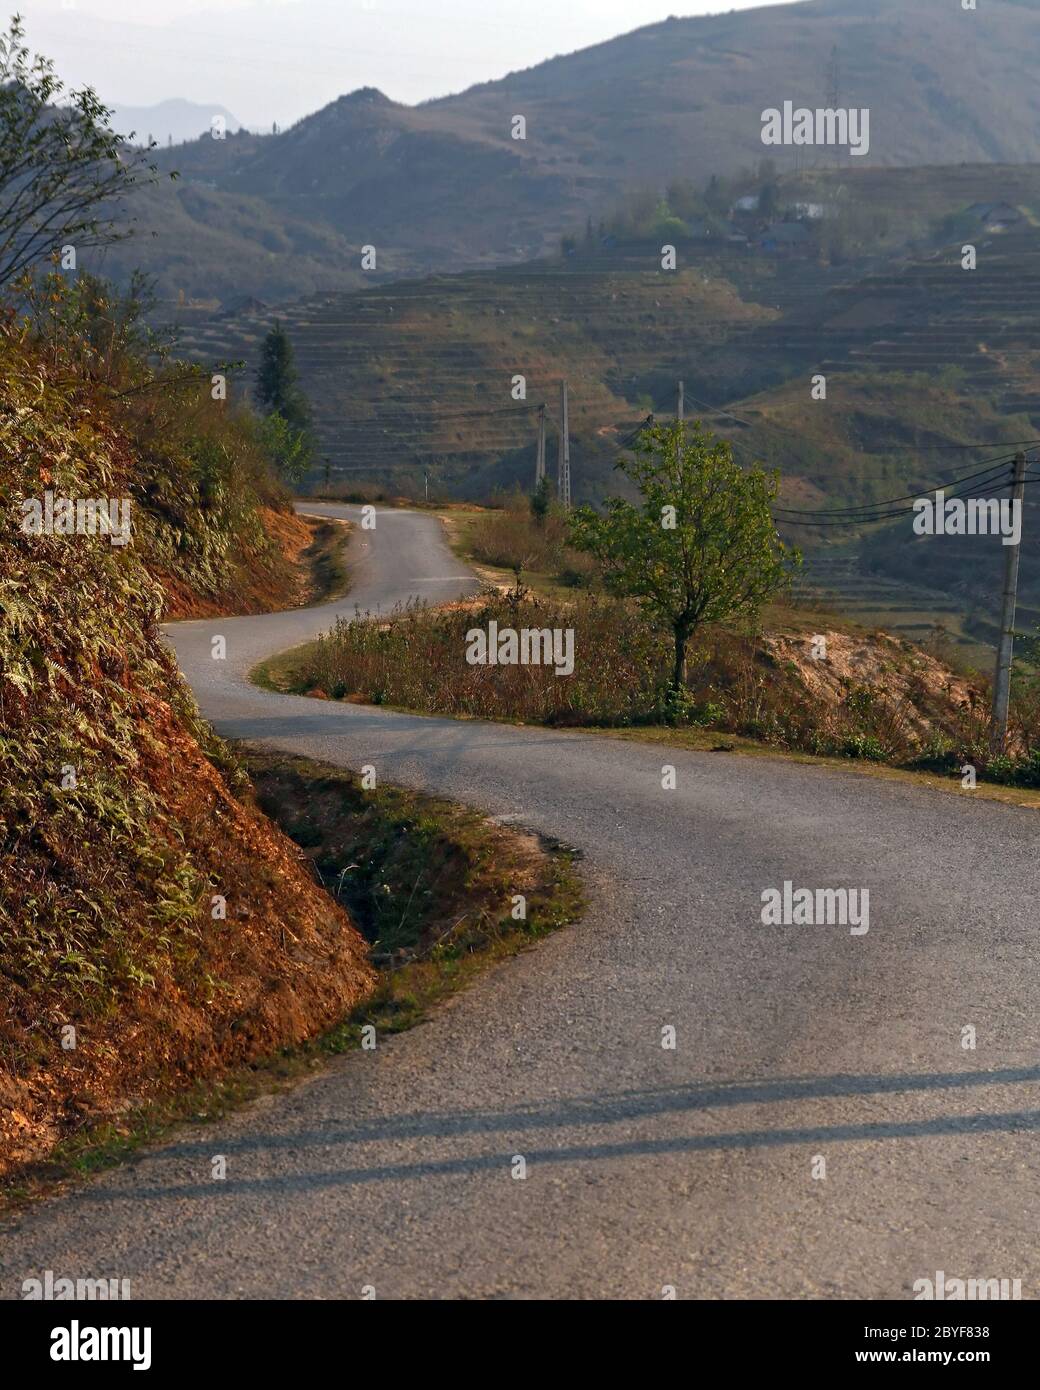 Curve pavement Road in Sapa Stock Photo